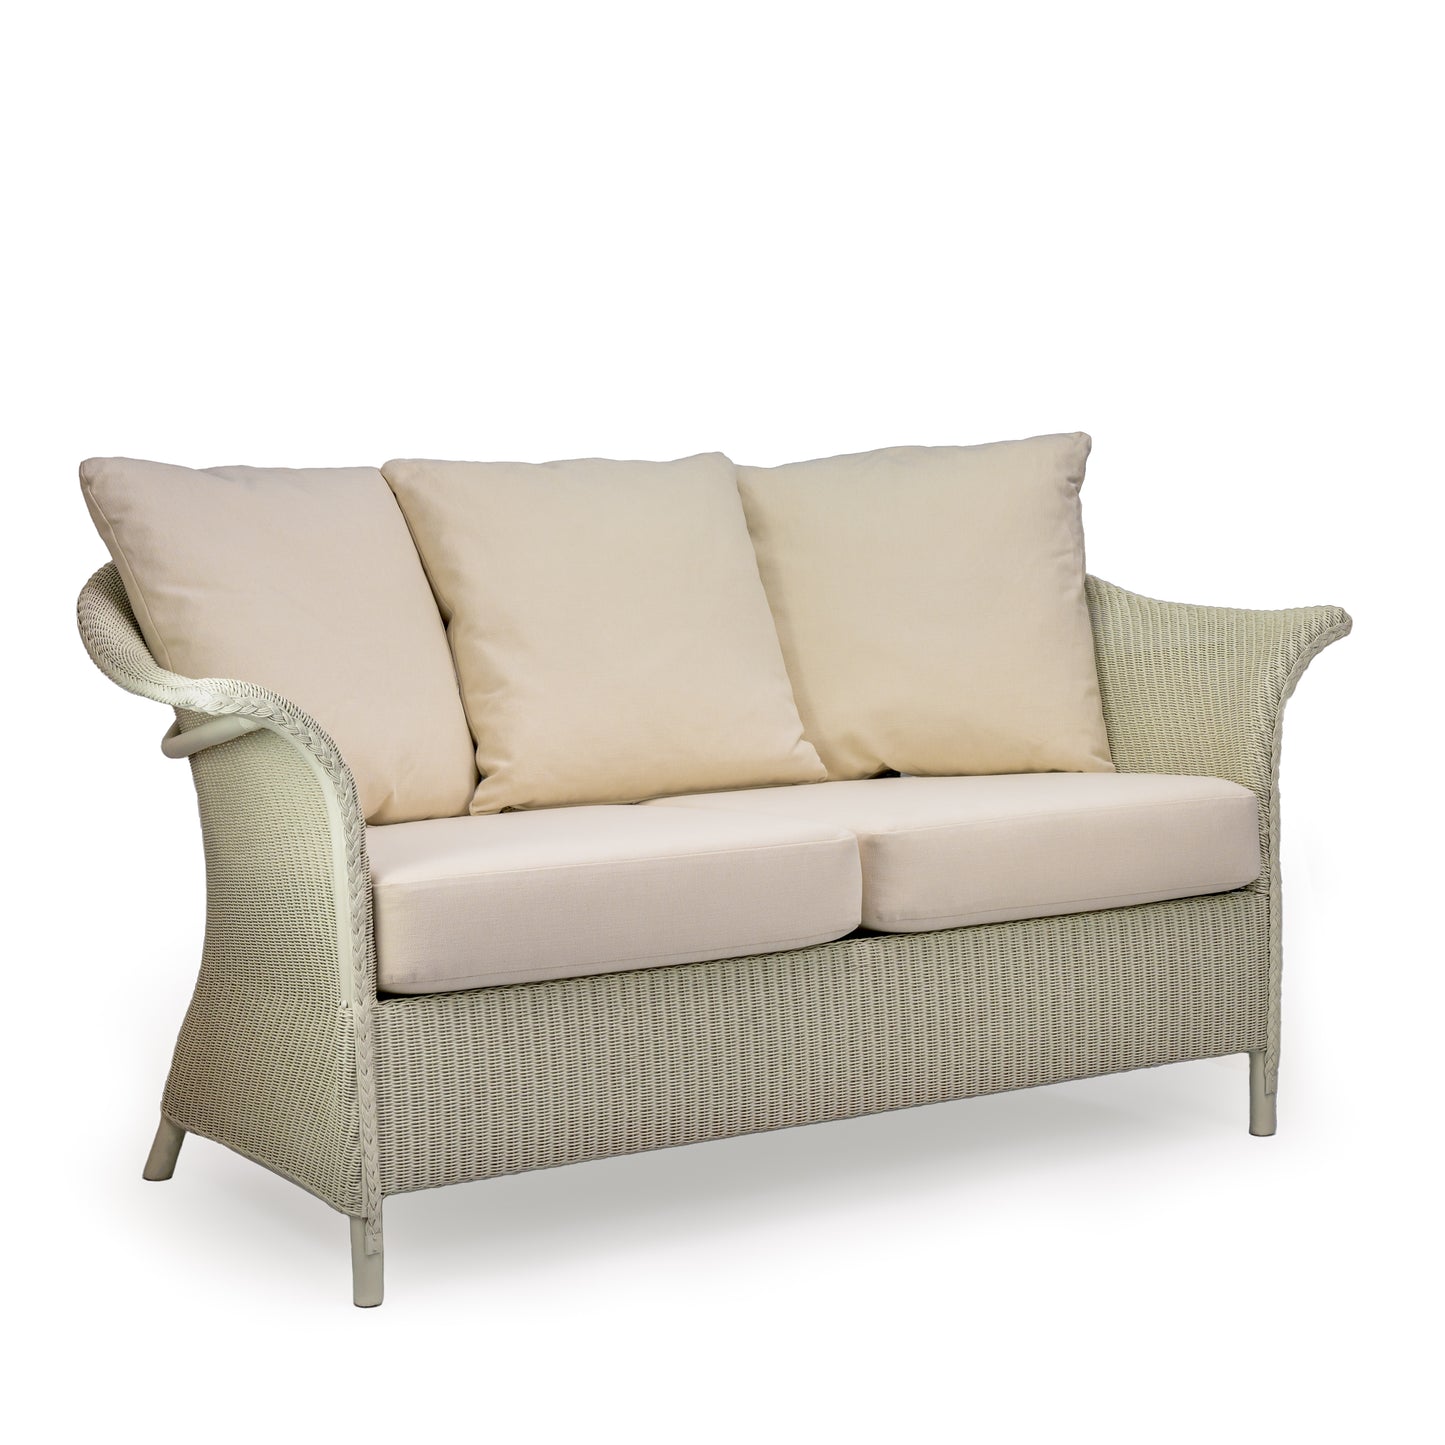 Banford Lloyd Loom 2 Seater Sofa With Scatter Back